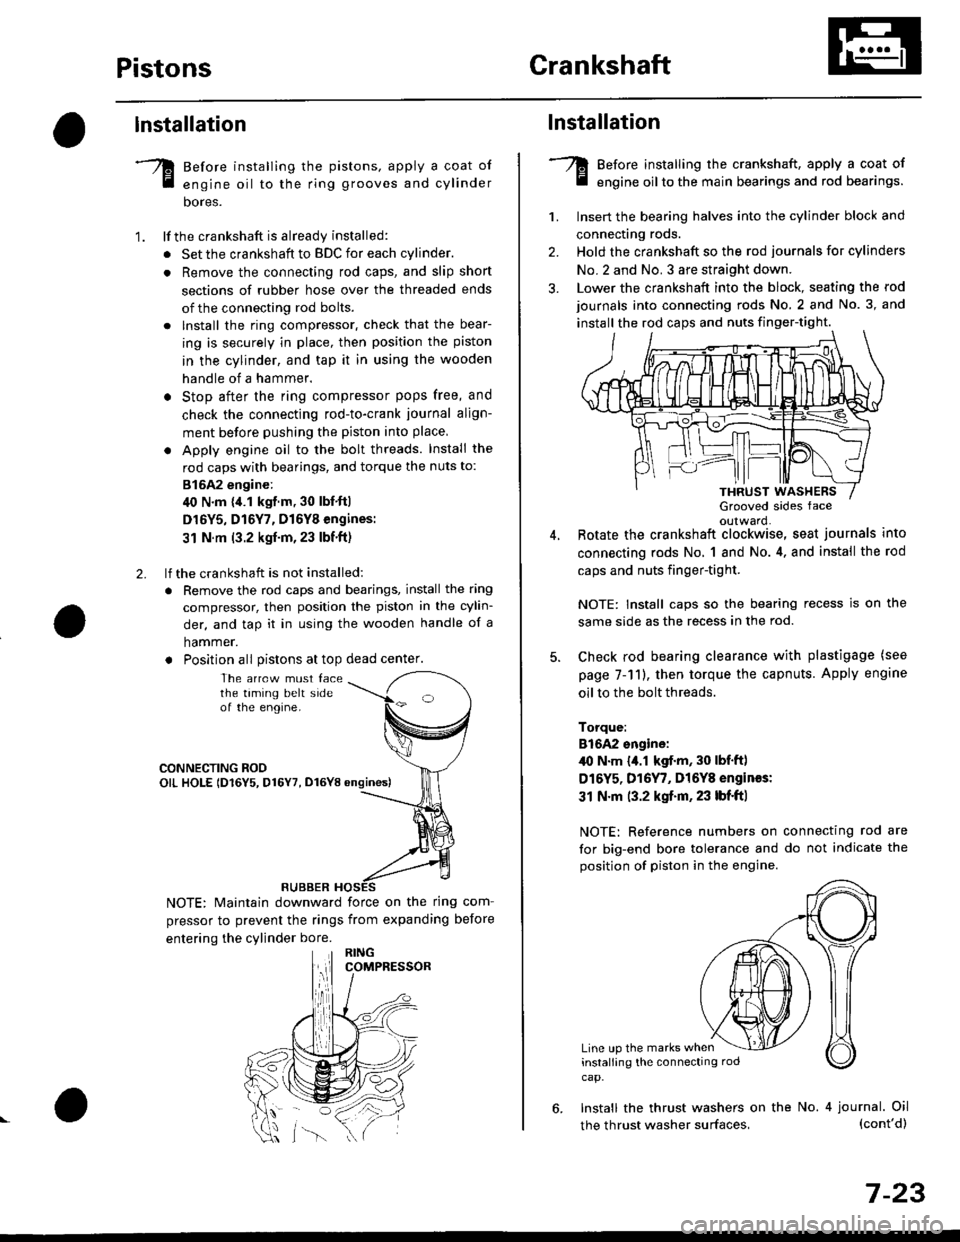 HONDA CIVIC 1996 6.G Workshop Manual PistonsGrankshaft
lnstallation
Before installing the pistons, apply a coat of
engine oil to the ring grooves and cylinder
bores.
lf the crankshaft is already installed:
. Set the crankshaft to BDC for